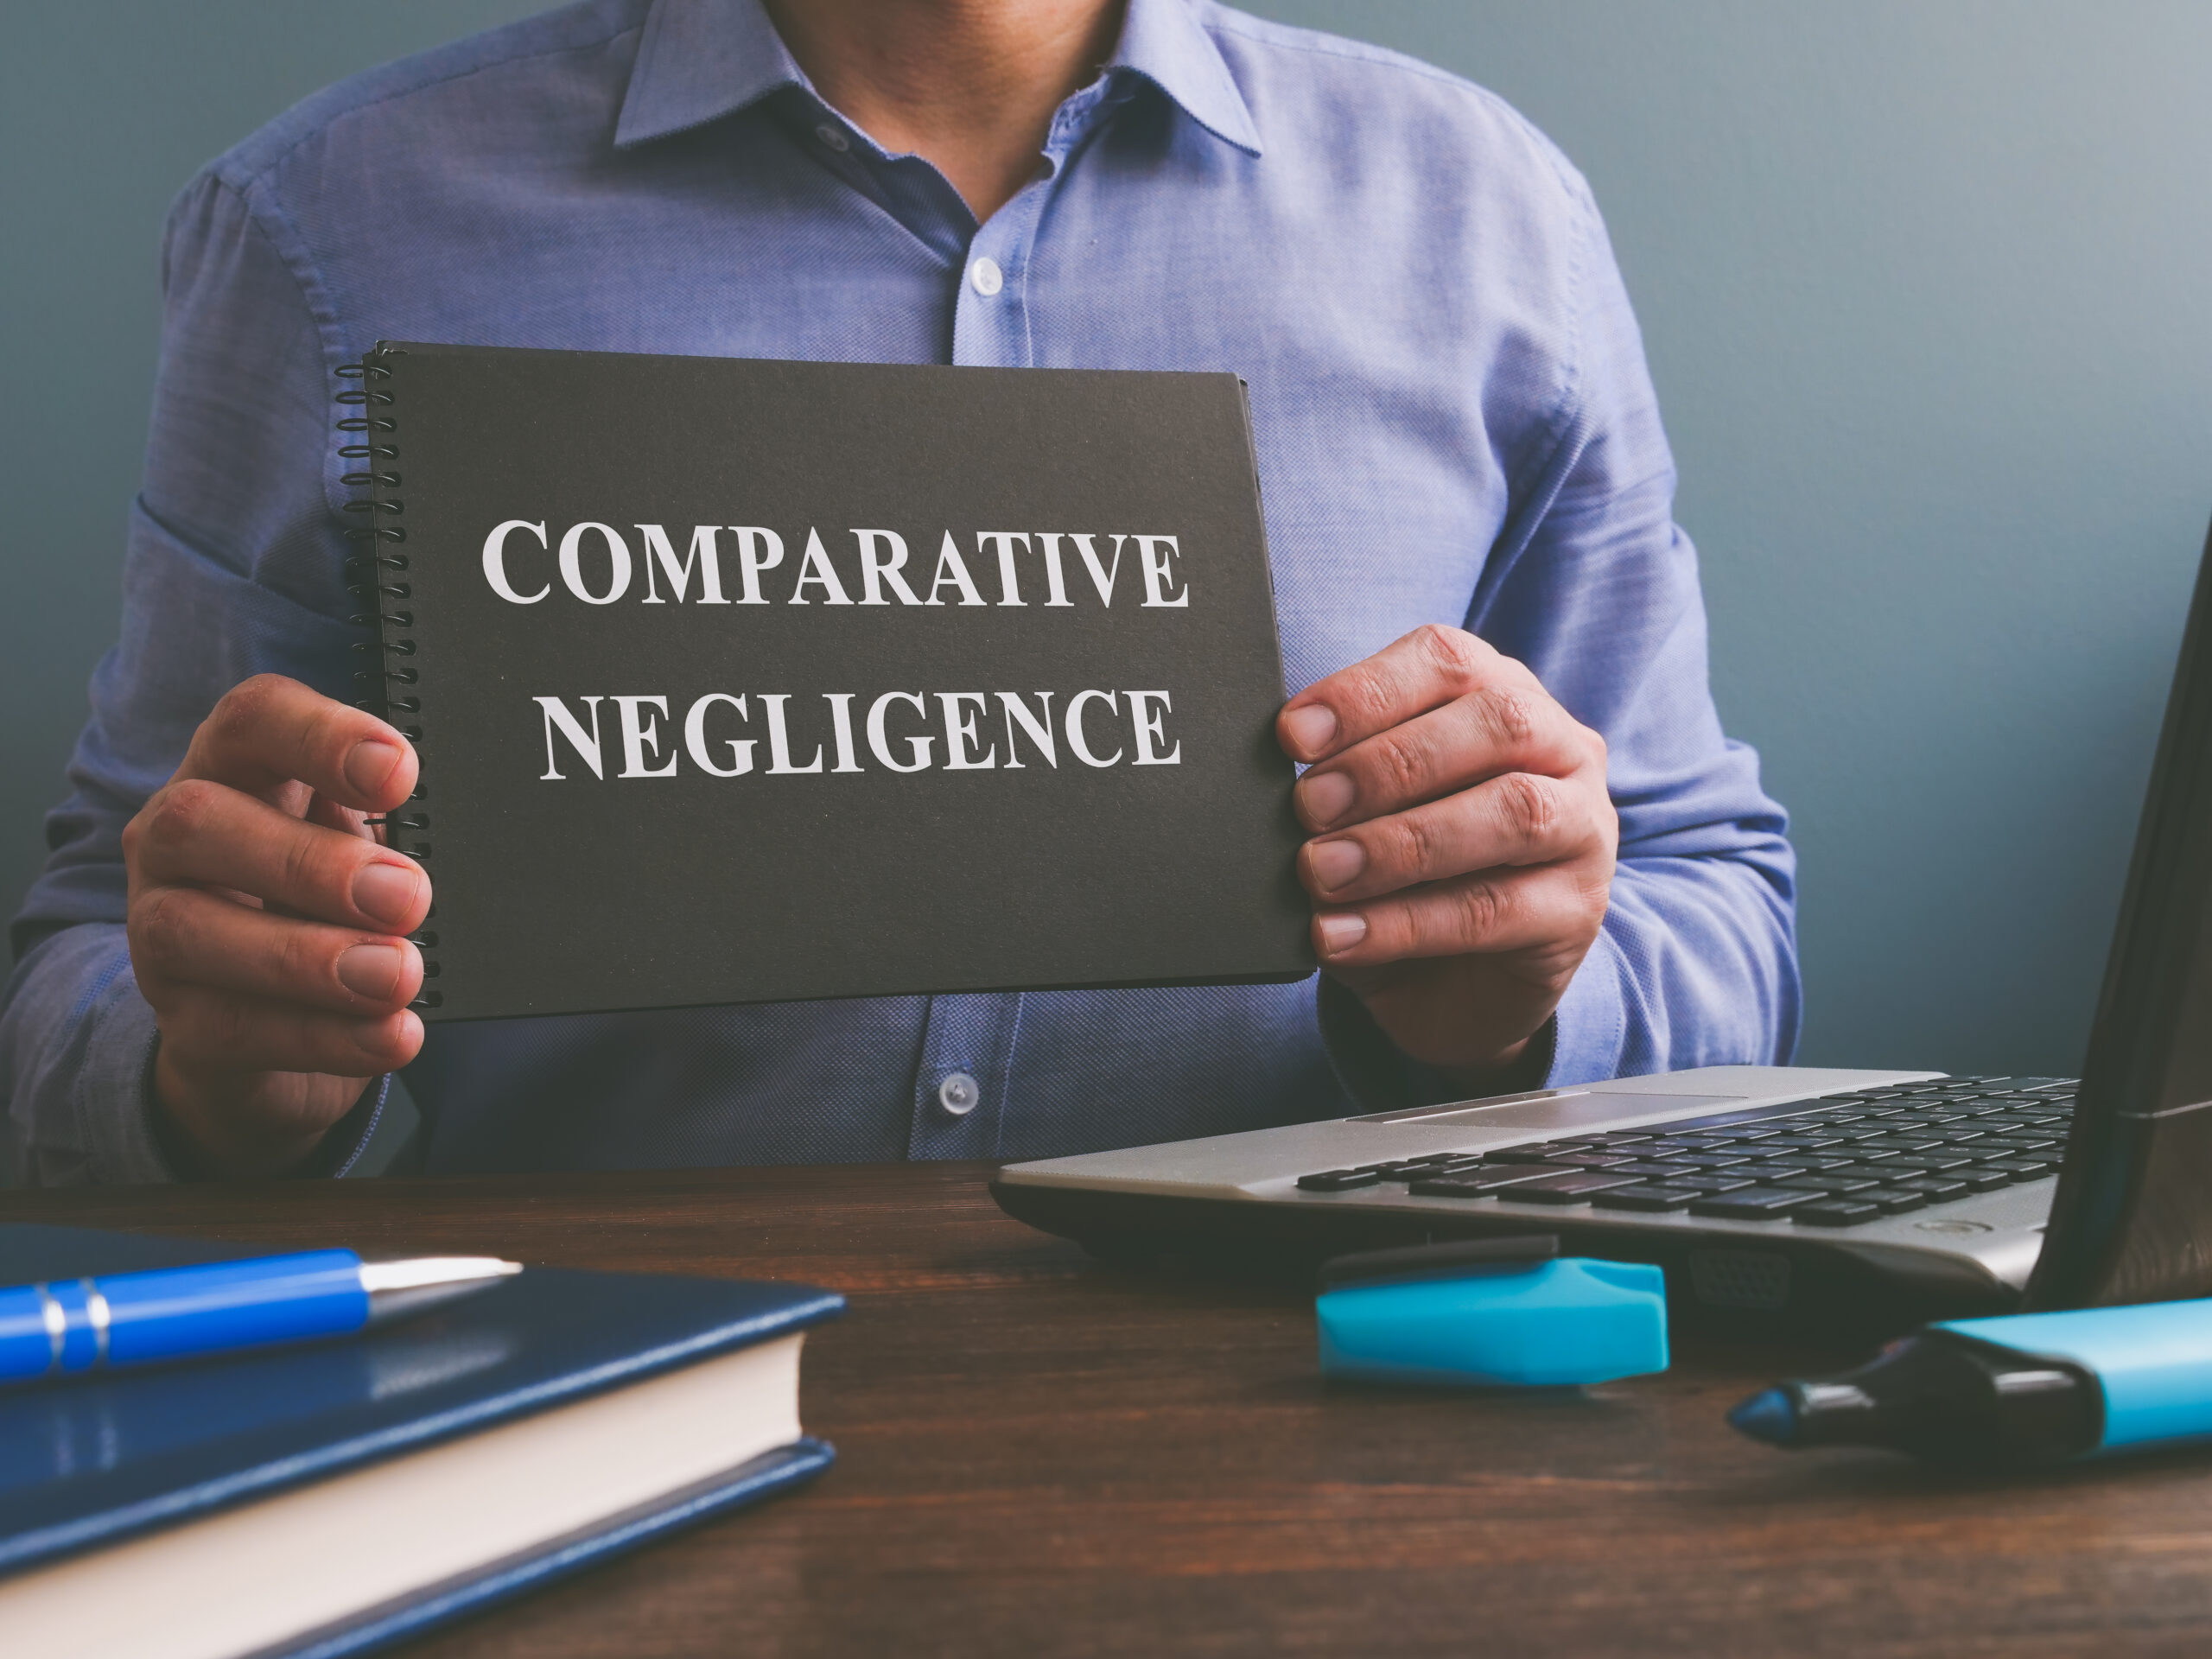 How Does Comparative Negligence Affect a Drunk Driving Accident Case?